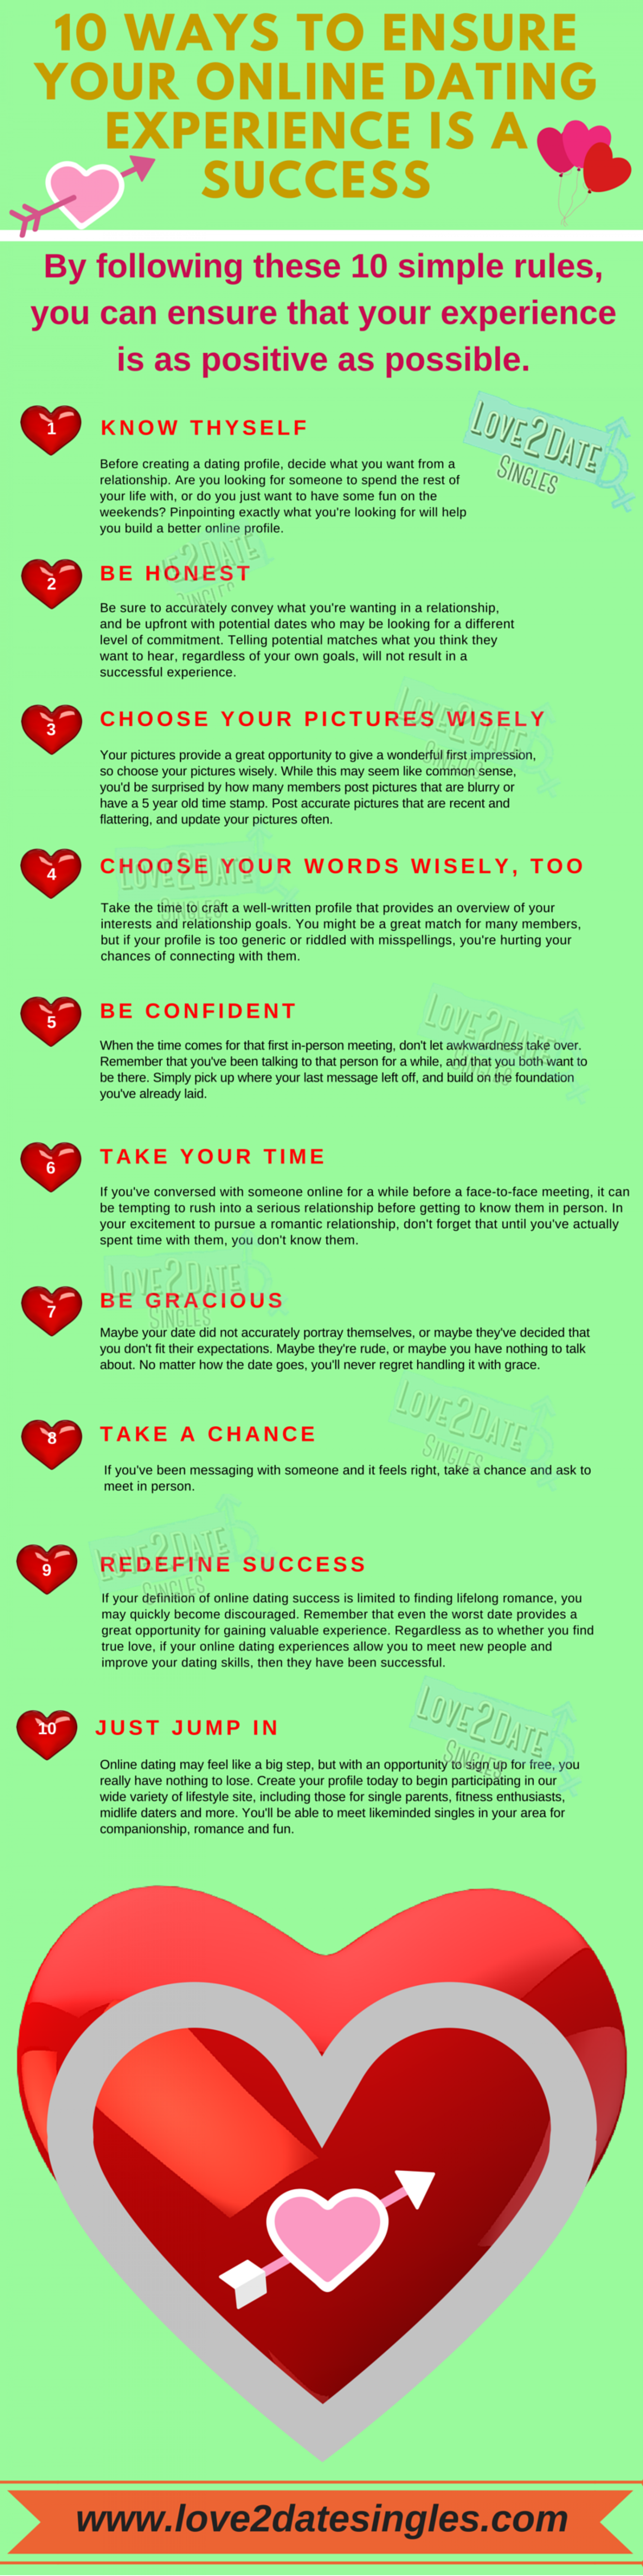 10 Ways To Ensure Your Online Dating Experience Is A Success Infographic